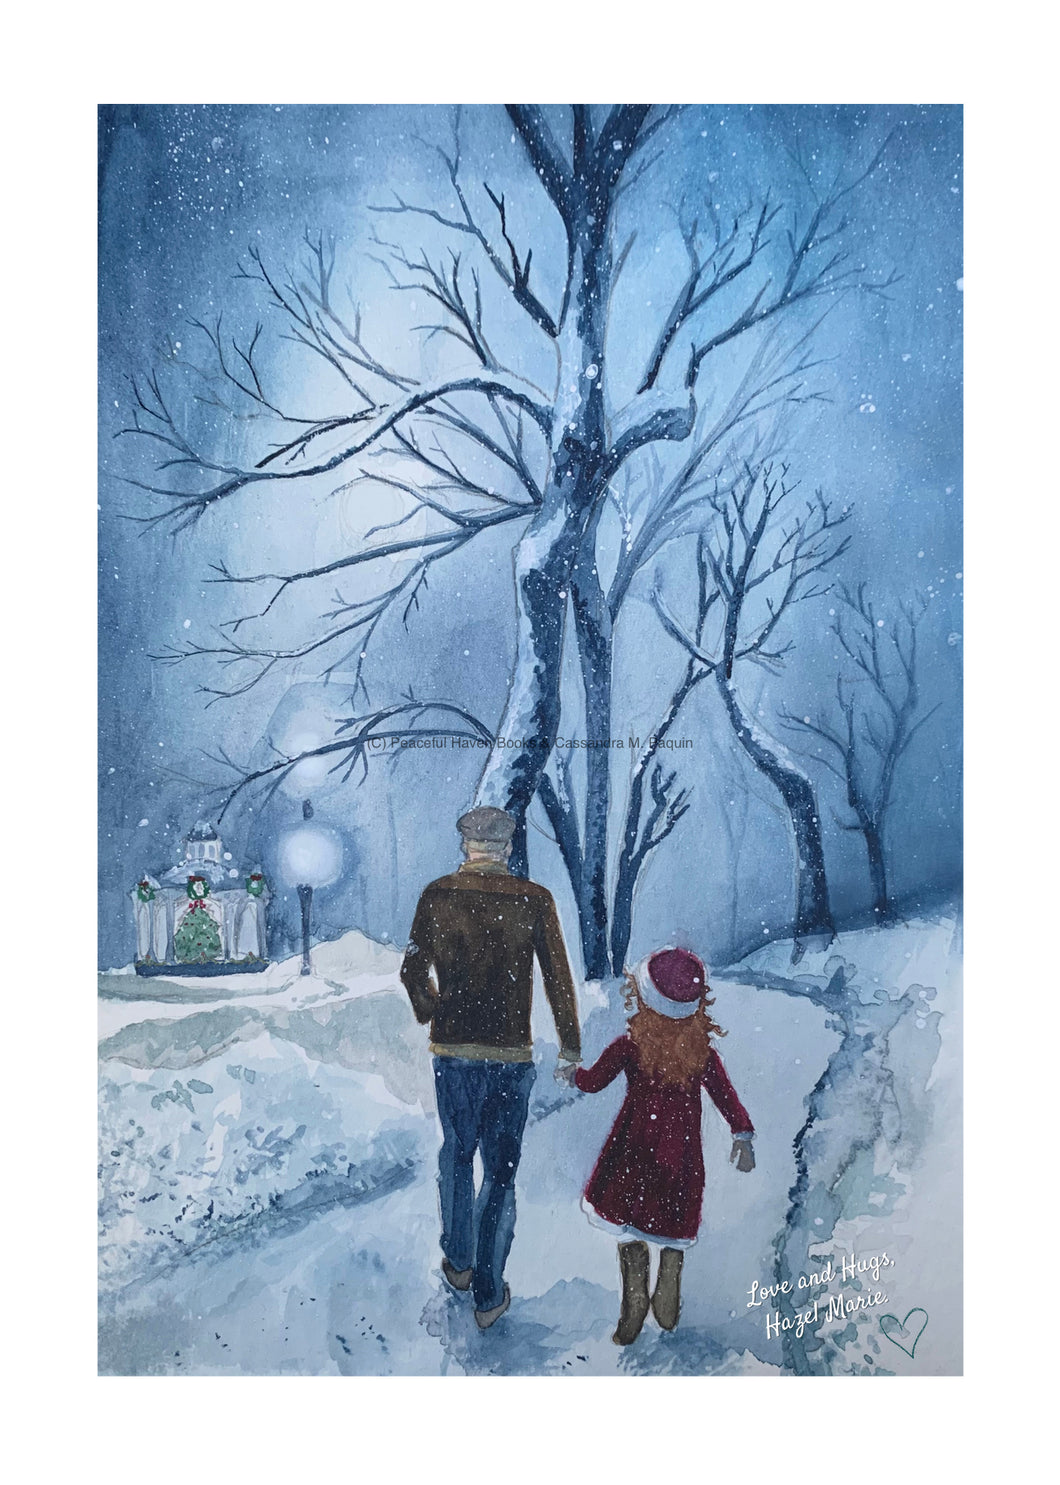 A lovely nighttime walk on the village common as Hazel Marie and Gramps walk to the truck from the church. The snowflakes are growing thicker after the caroling event in the story The Gift of Gifting from the book It’s Me, Hazel Marie! by author Cassandra M. Paquin. The illustrations are by illustrator, Amanda Cotten and focus on a child just being a child in wholesome, uplifting stories that are perfect for ages 6 through 106! Perfect for matting and framing!